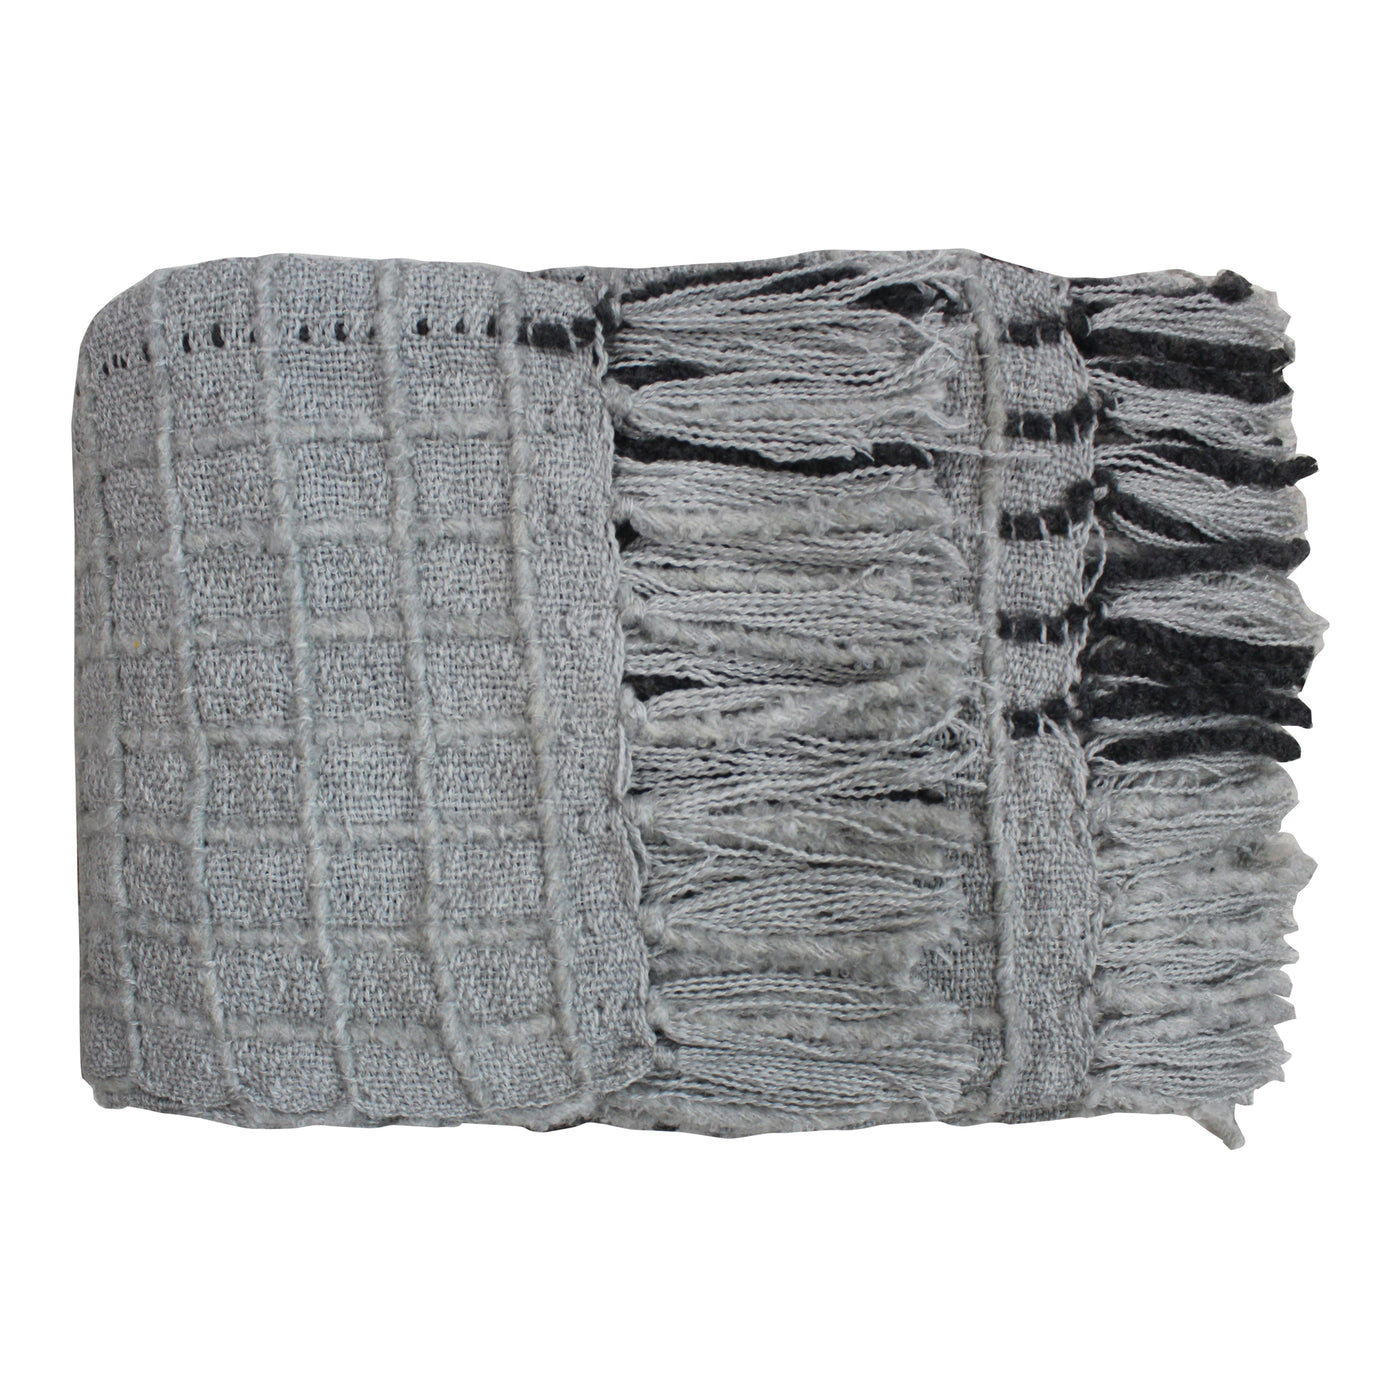 The Felicity Throw will have you wishing it could be cozy fall weather all year round. It features a charcoal gray waffle ...